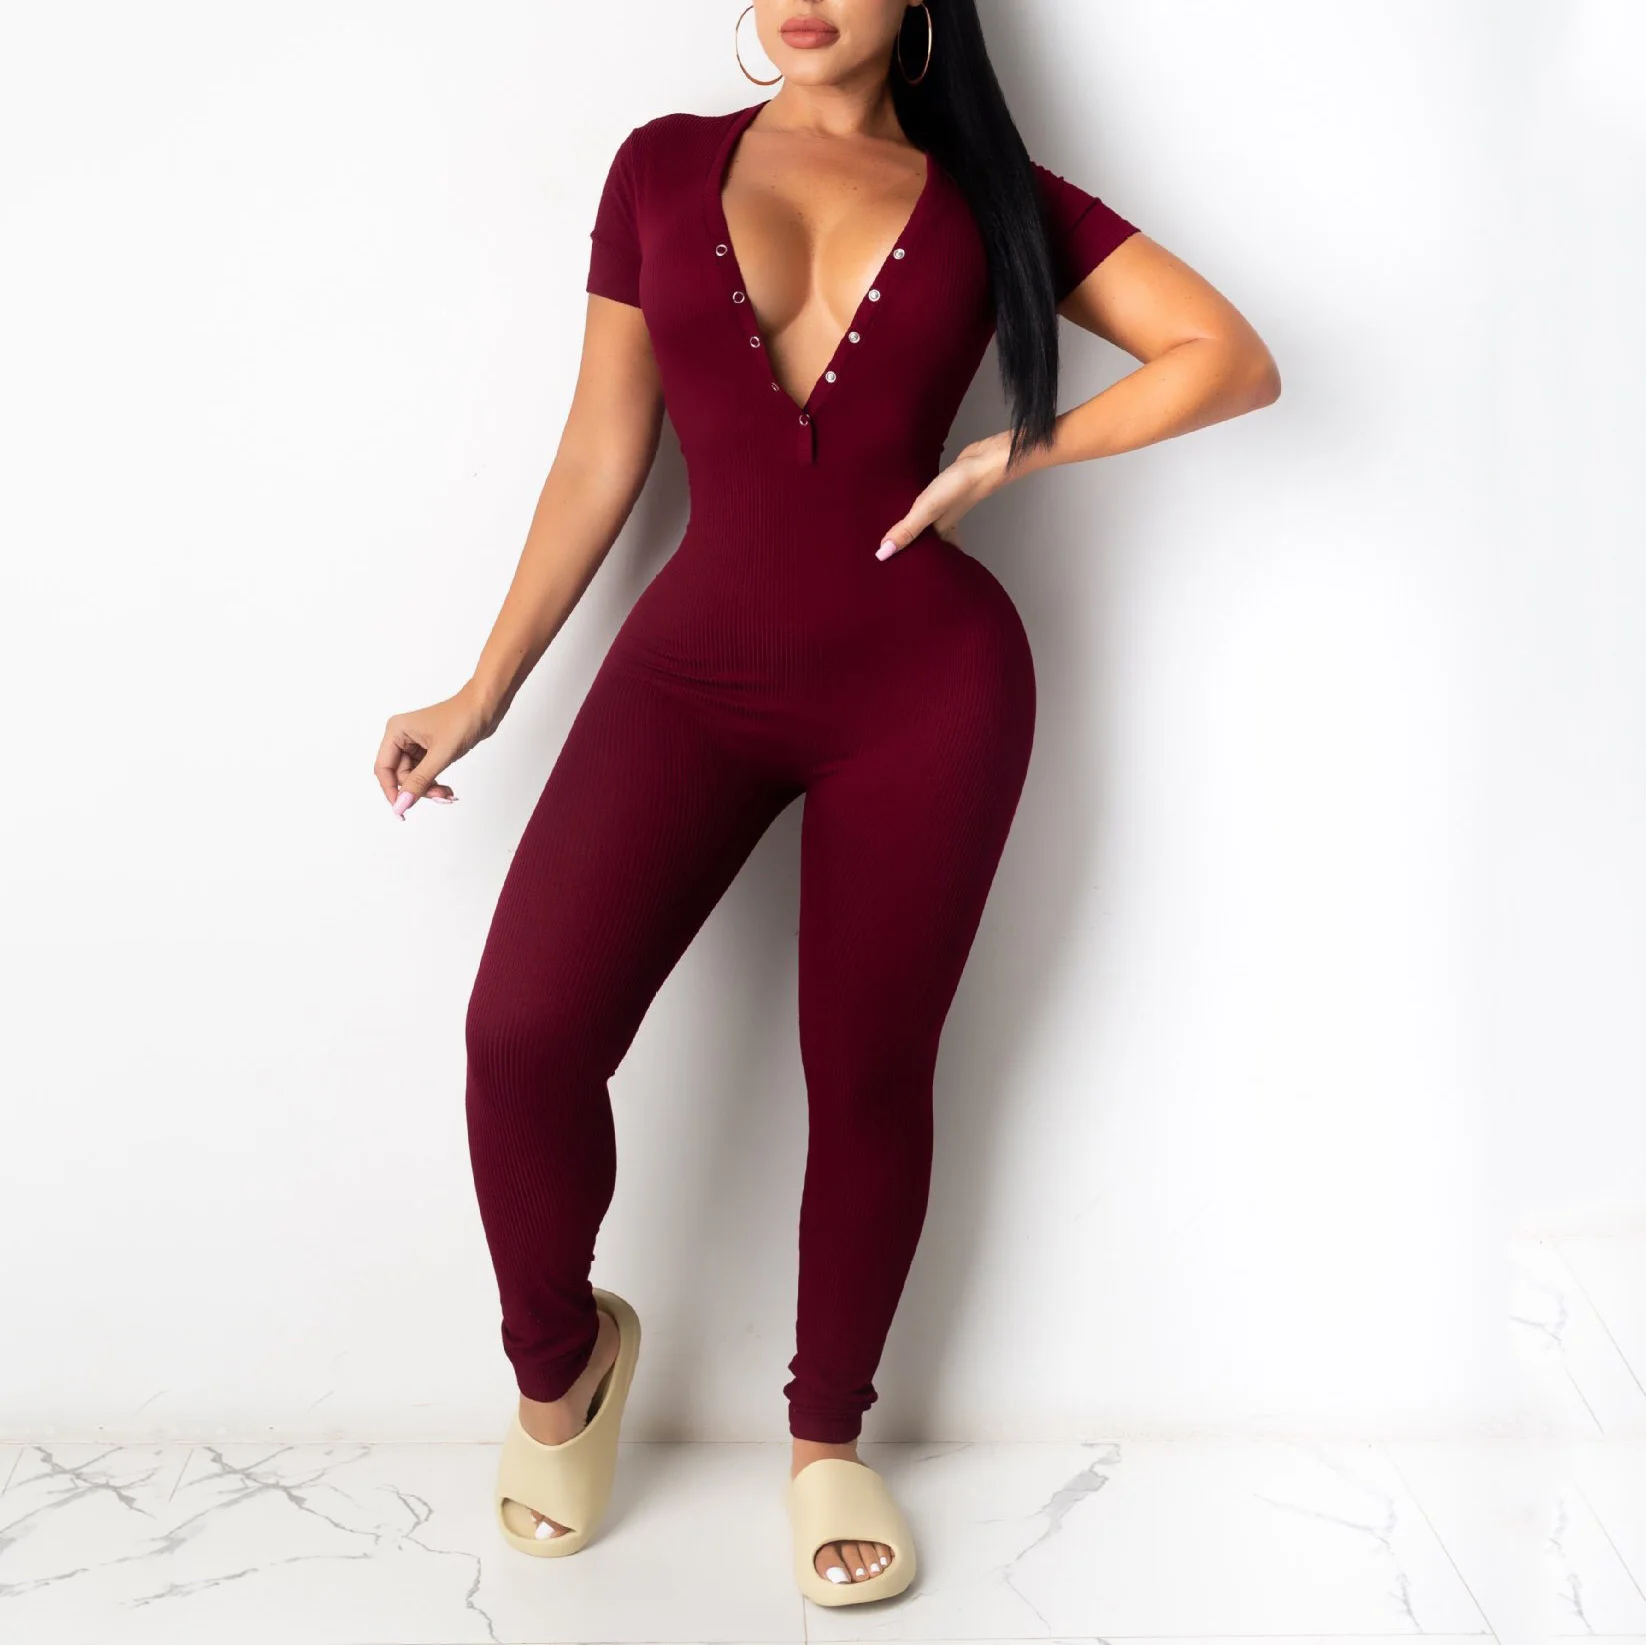 

2020 New Bodycon Jumpsuits Deep v Neck Burgundy Long Pants High Waist Sheath Elegant For Evening Party Night Rompers & Jumpsuits